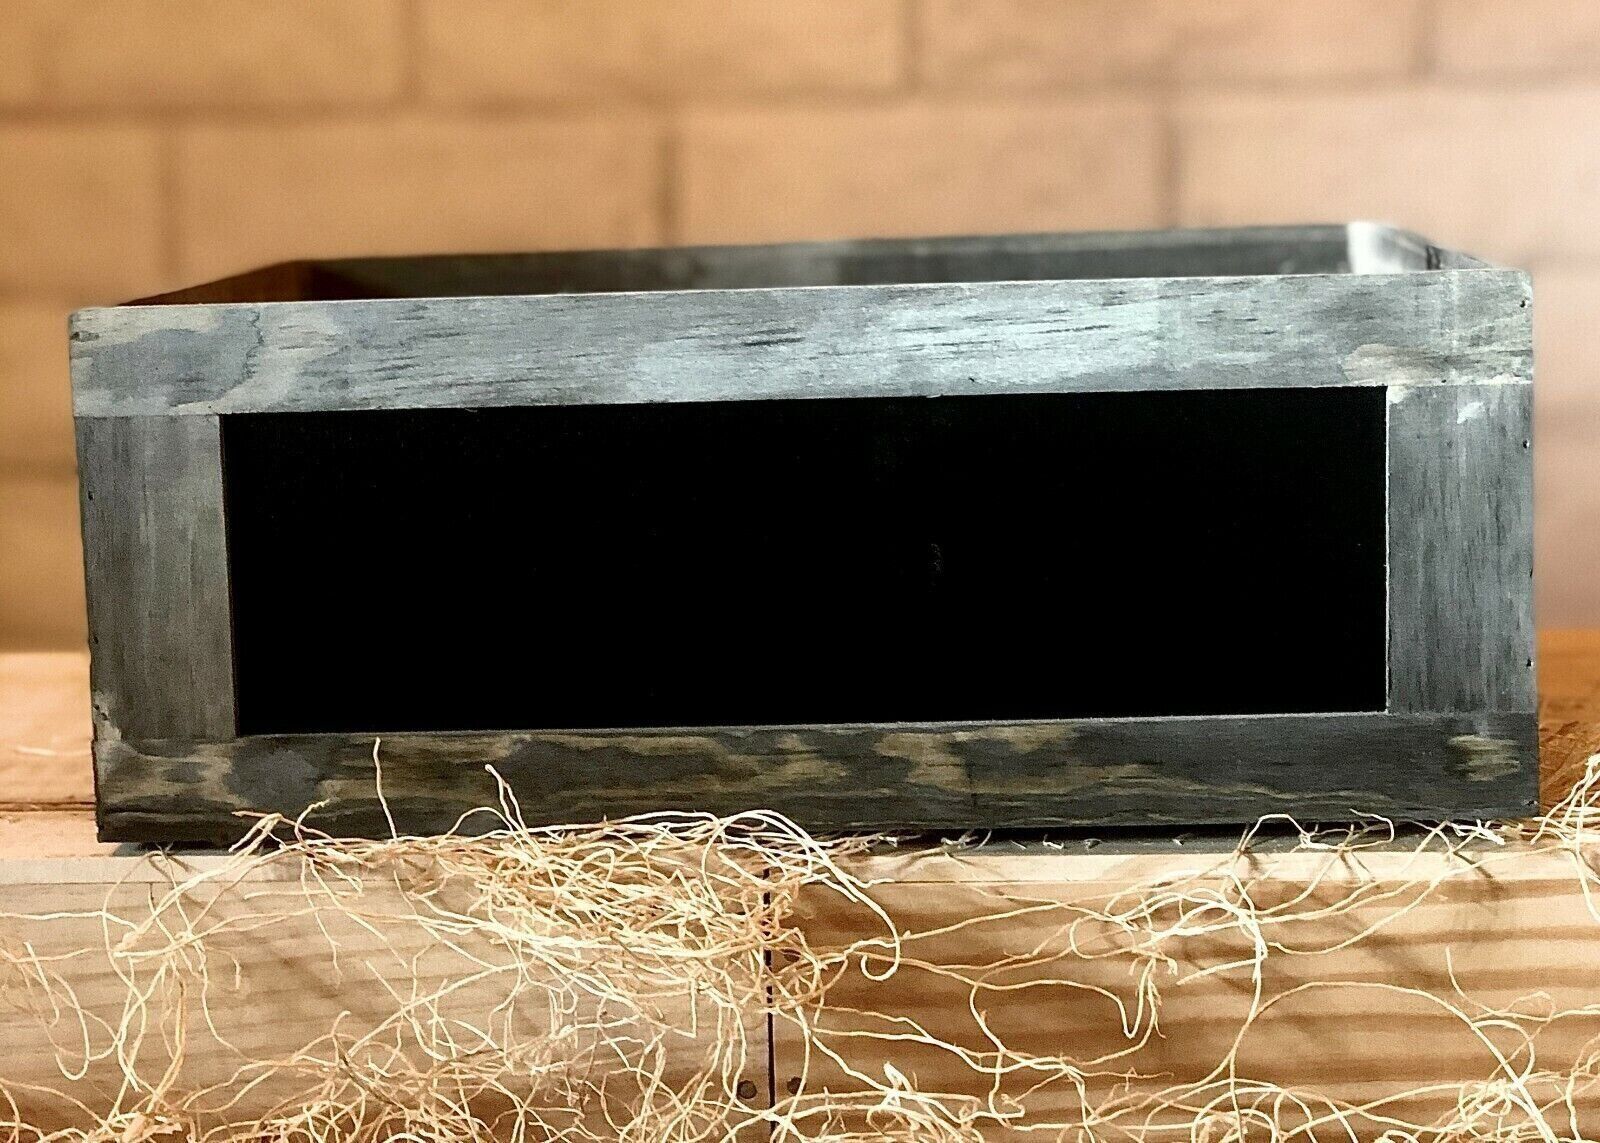 Wooden rustic X-LARGE Gift Crate with Handles & Chalkboard 16 x 23 x 8 Inches